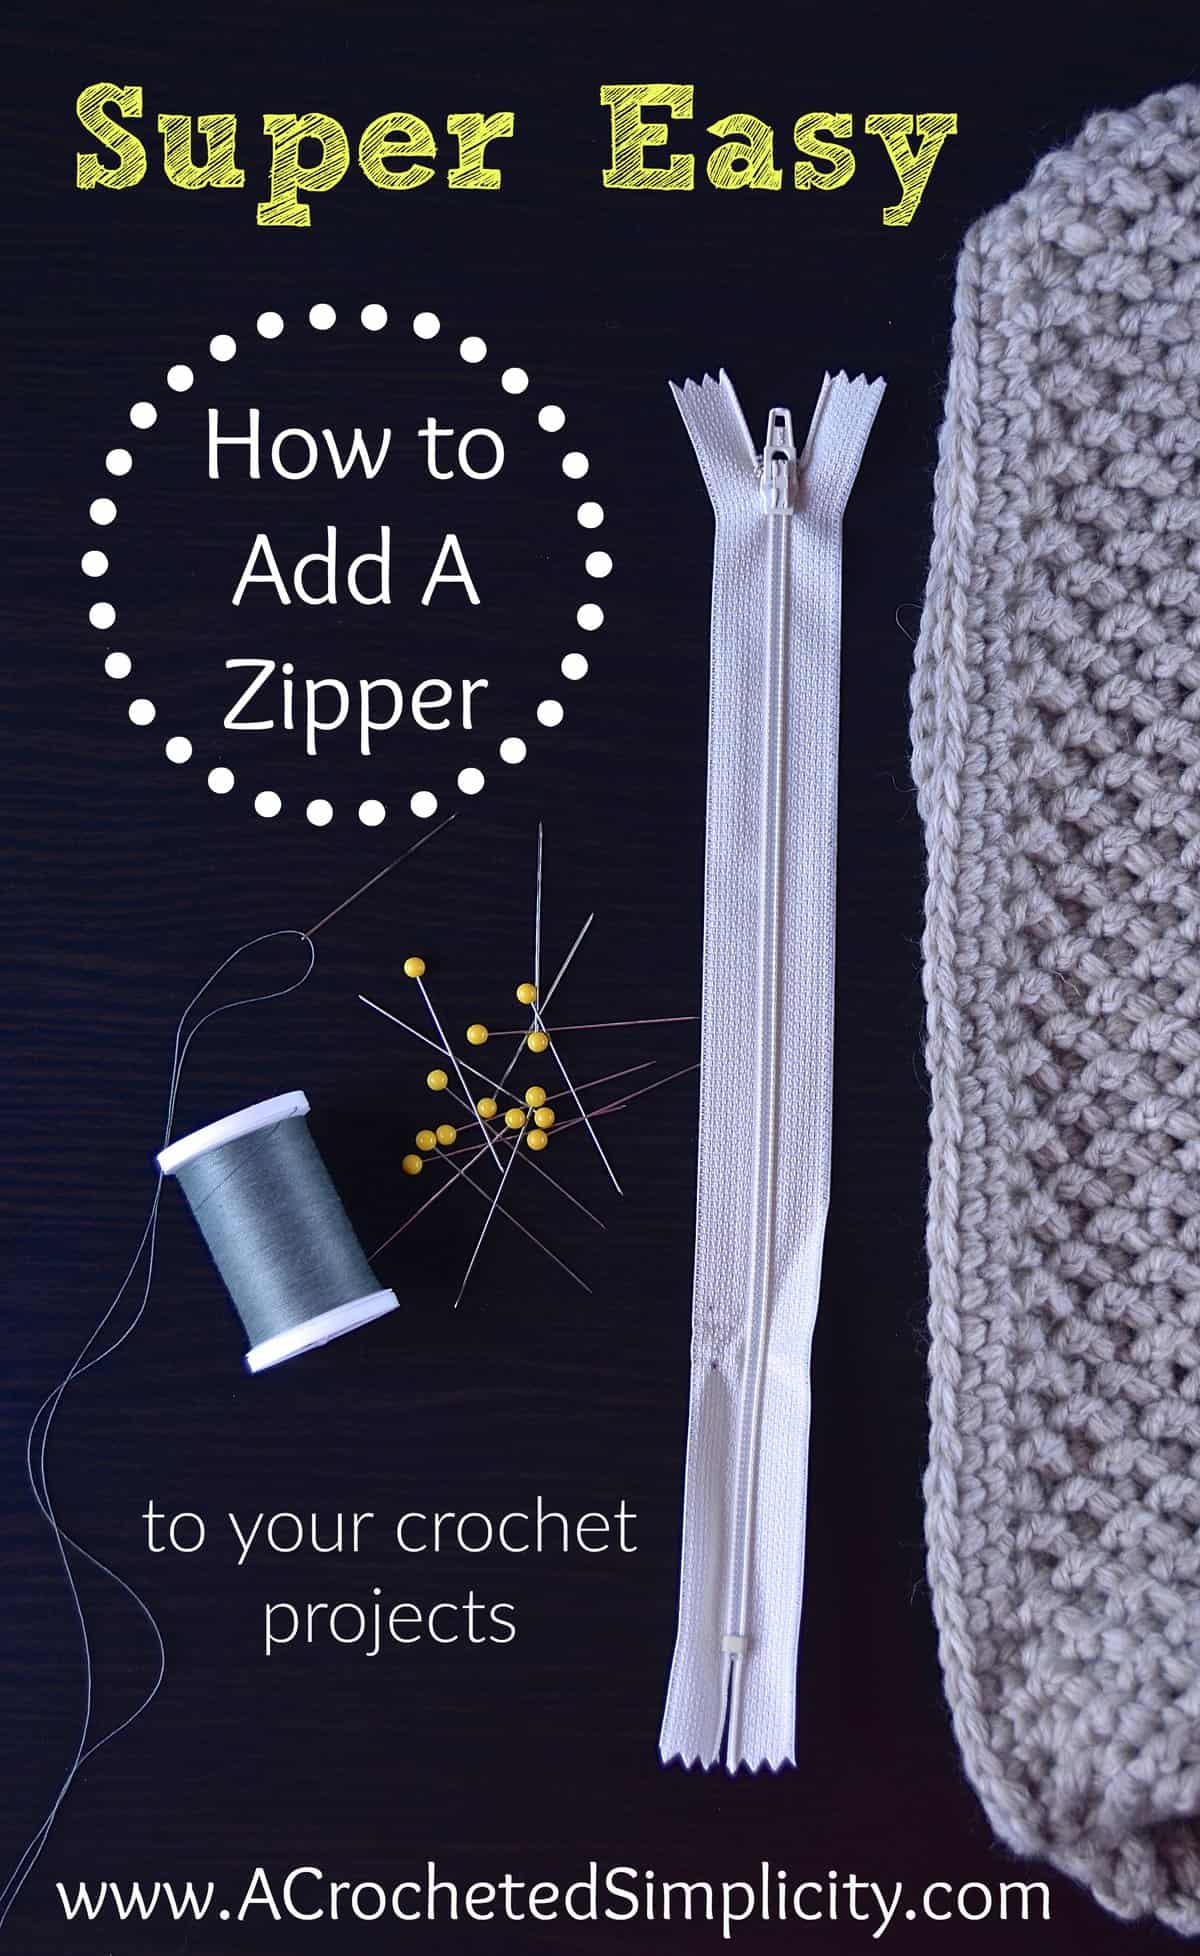 How to Sew a Zipper: 2 Easy Ways for Beginners